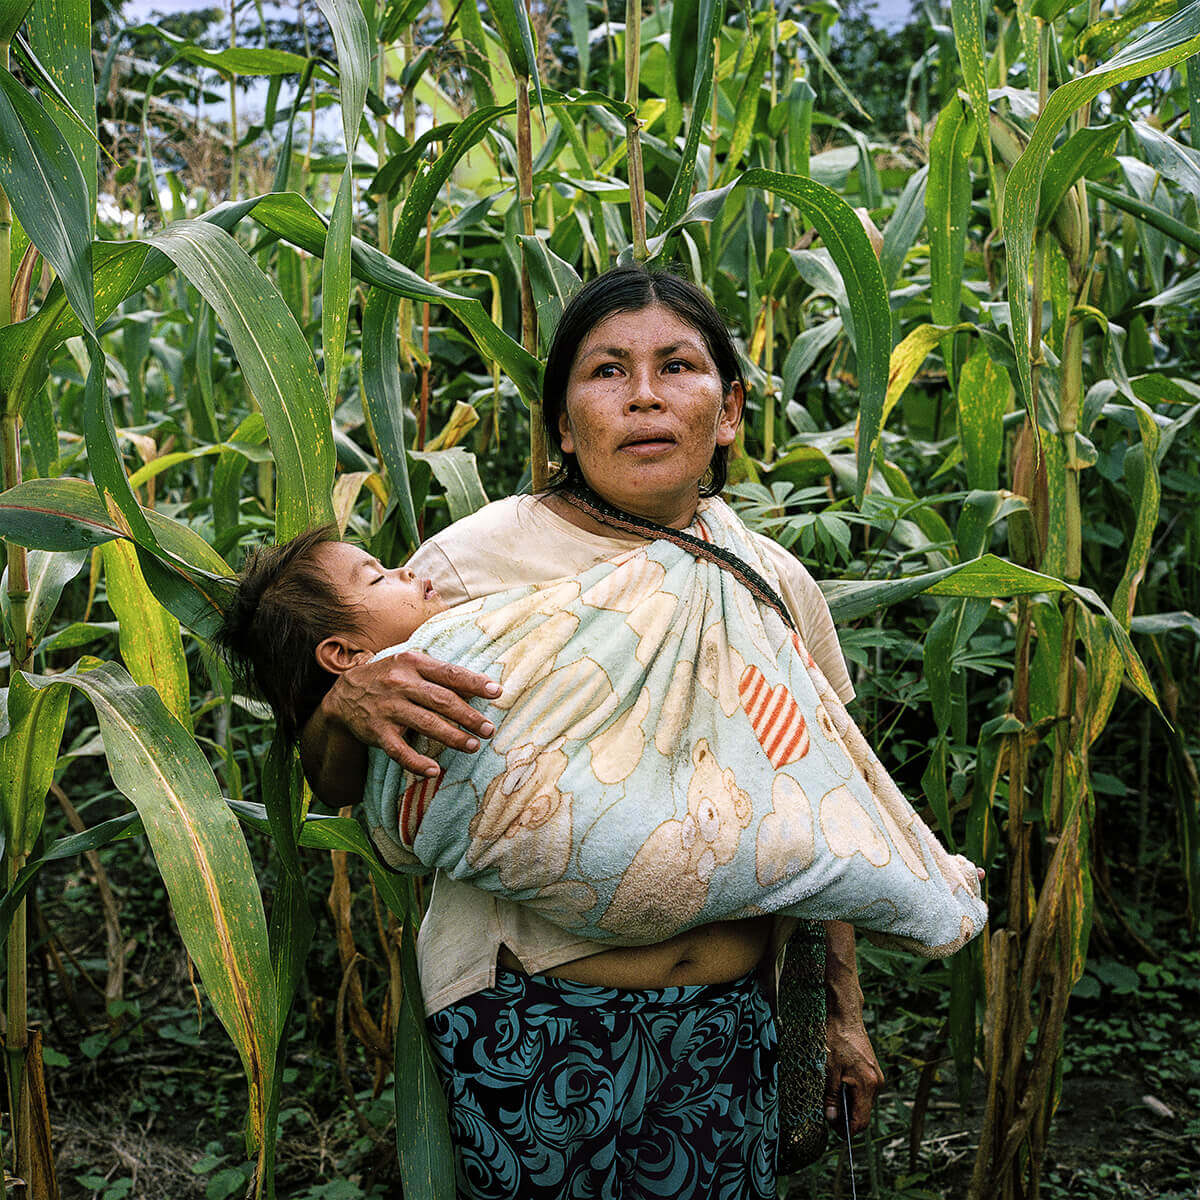 A photo of a woman clutching a child in a sling, standing in a field of corn.